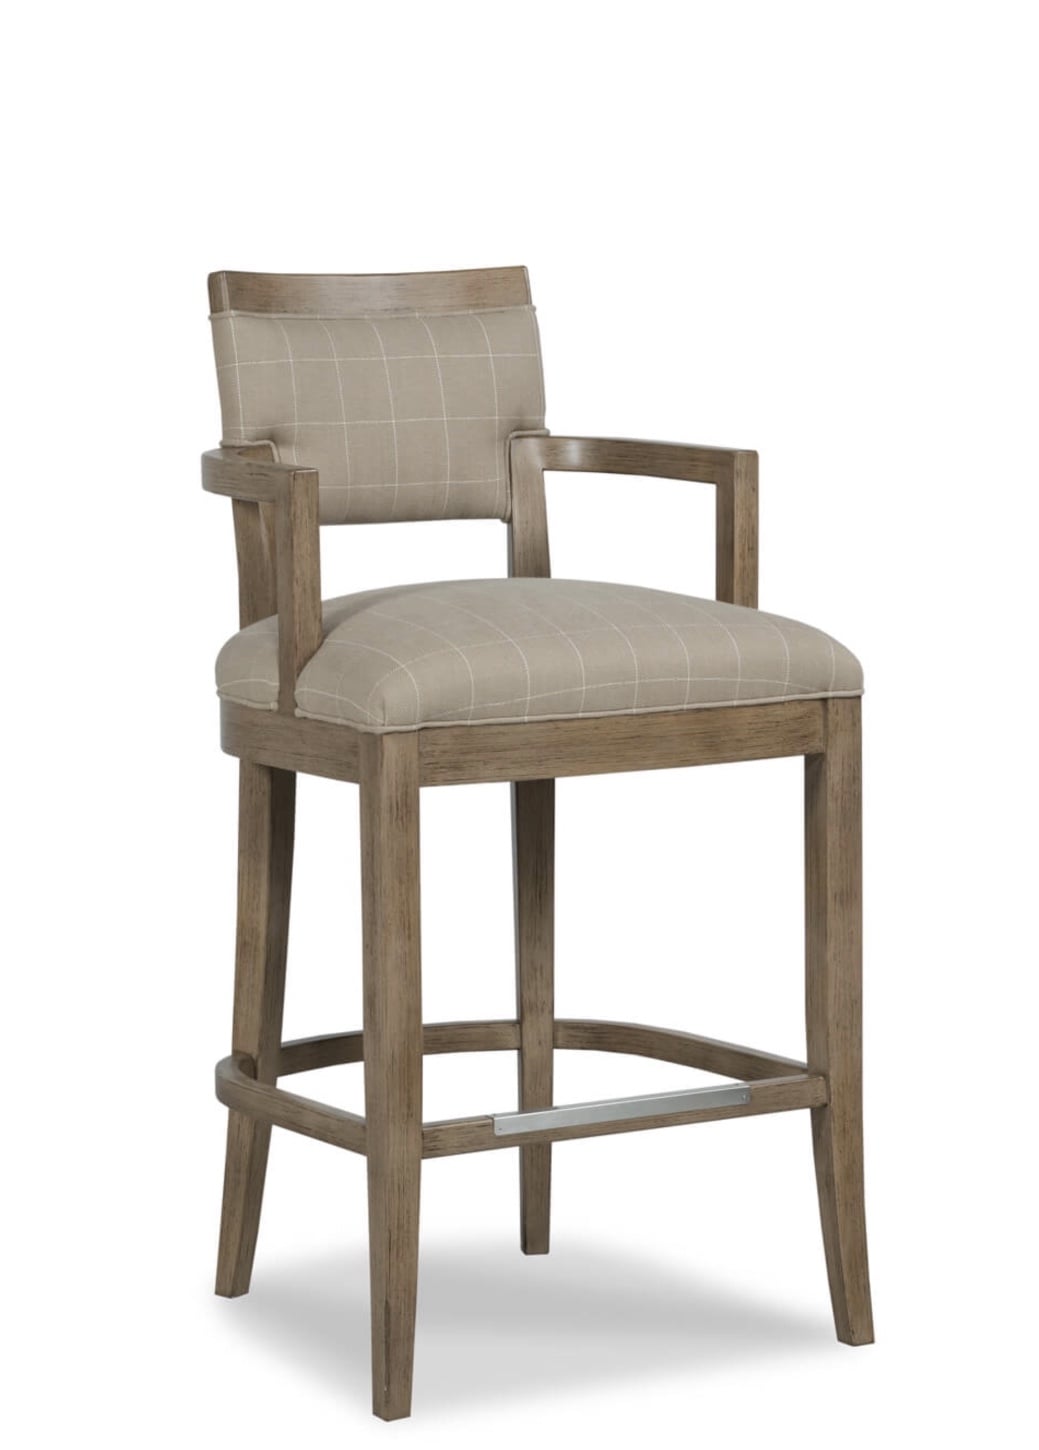 Made to Order Bar Stools Furniture. - BST 011-01